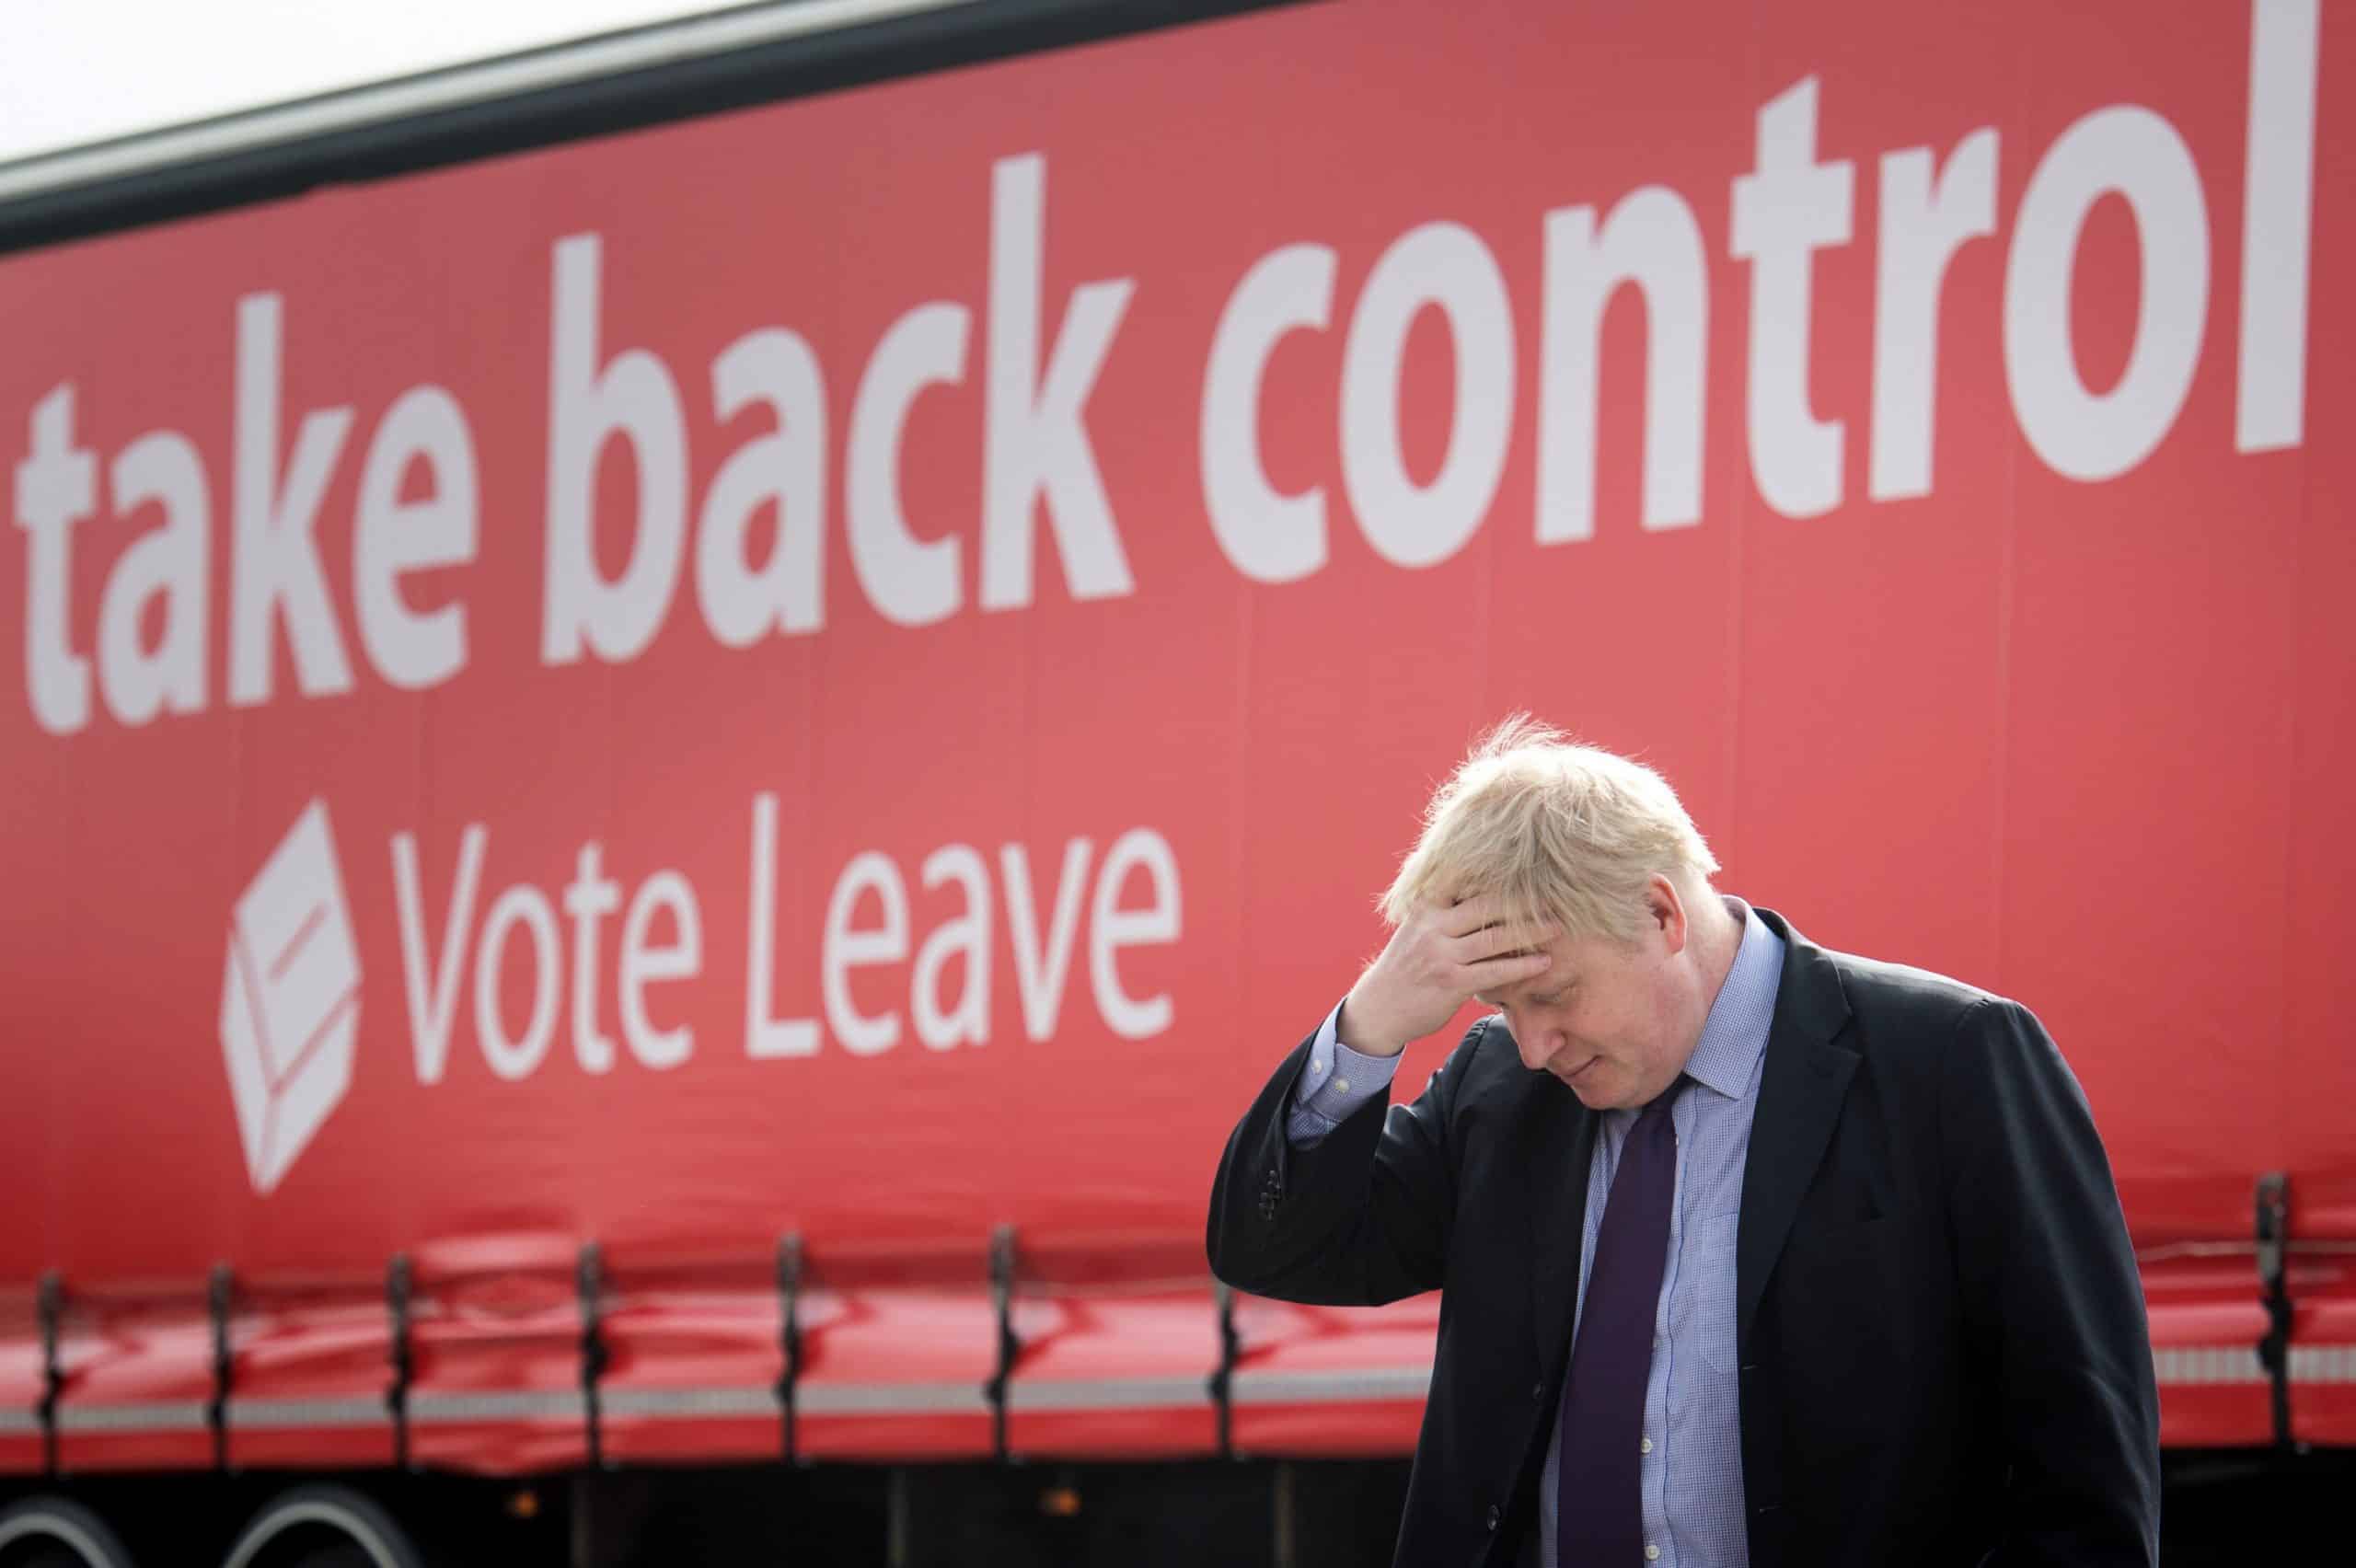 Rhetoric vs. reality: What voters were falsely promised about Brexit